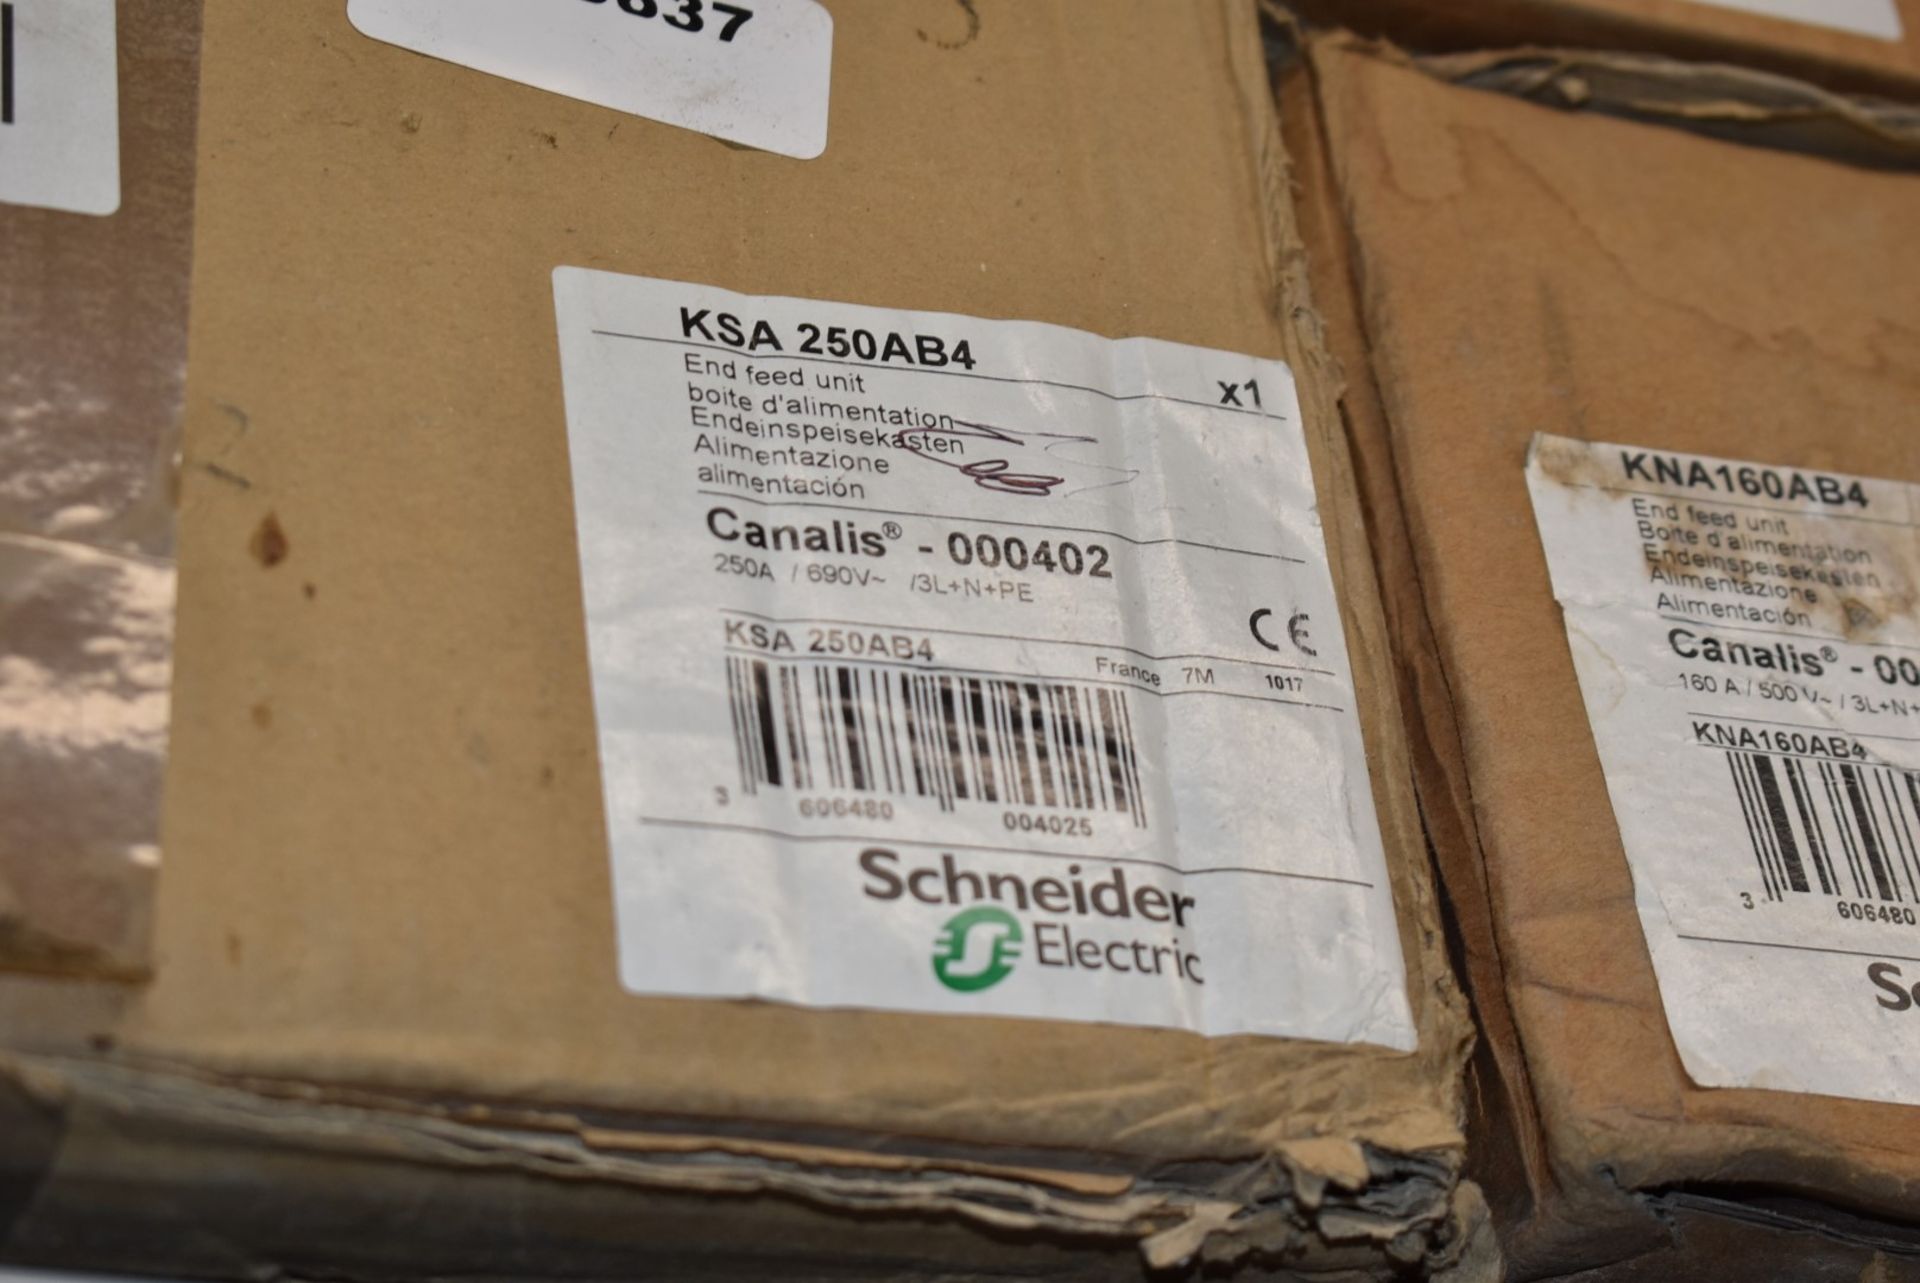 3 x Schneider Electric Canalis End Feed Units - Types KSA250AB4 & KNA160AB4 - RRP £1,360 - Image 4 of 7